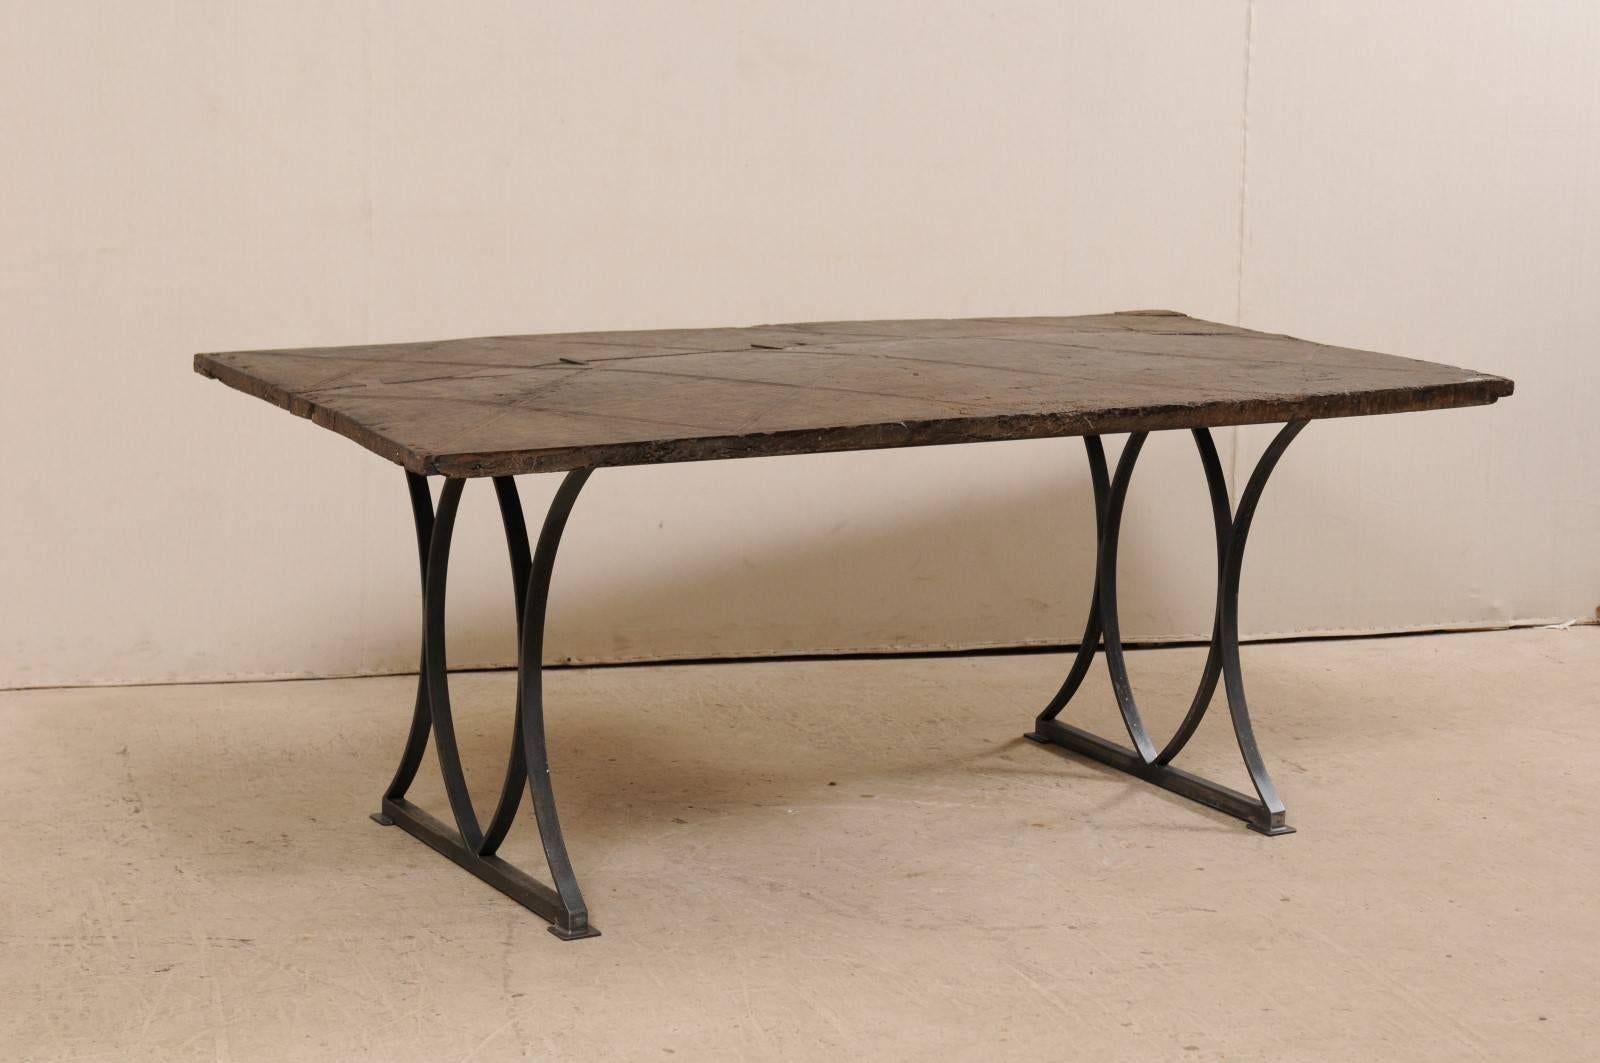 A custom table with an 18th century Spanish hand-carved door top. This rectangular-shaped table has been fashioned by setting an 18th century Spanish door onto a custom iron base. The door top of this table has been hand-carved with a criss-cross